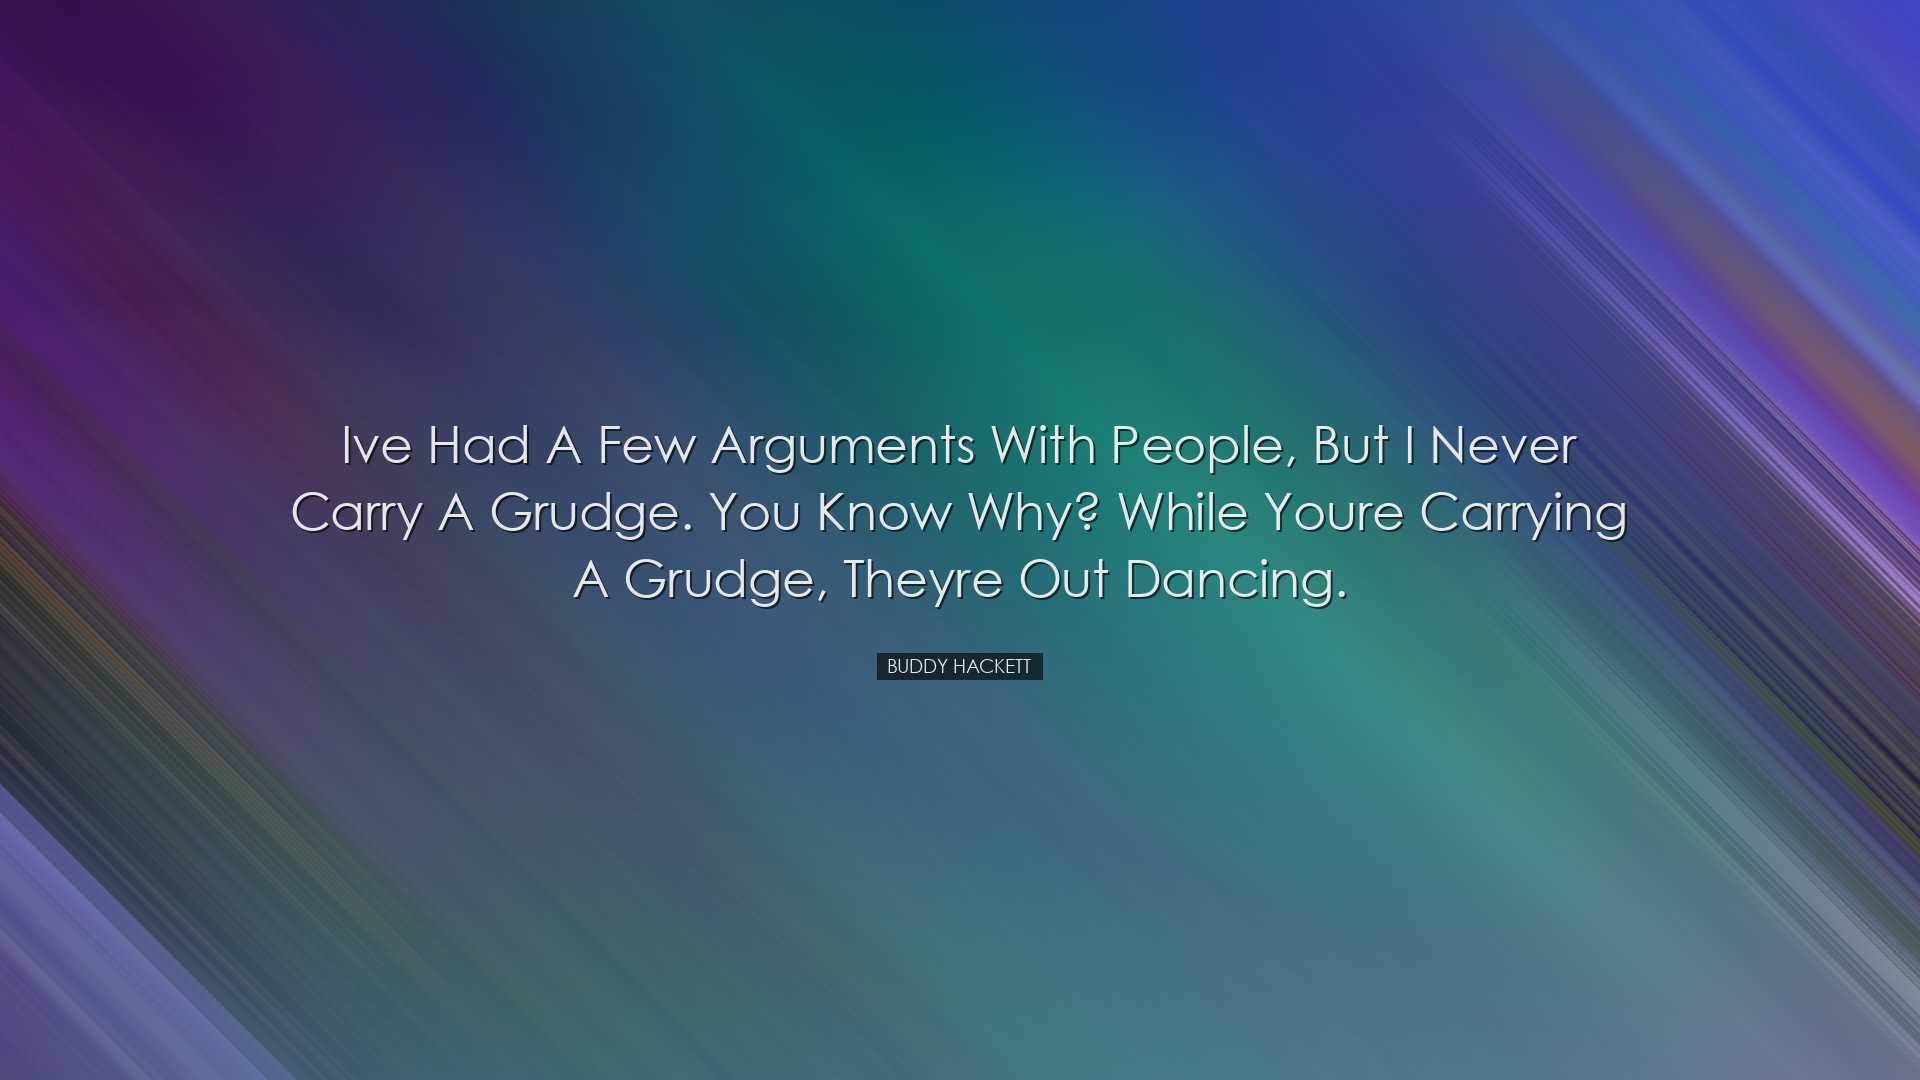 Ive had a few arguments with people, but I never carry a grudge. Y